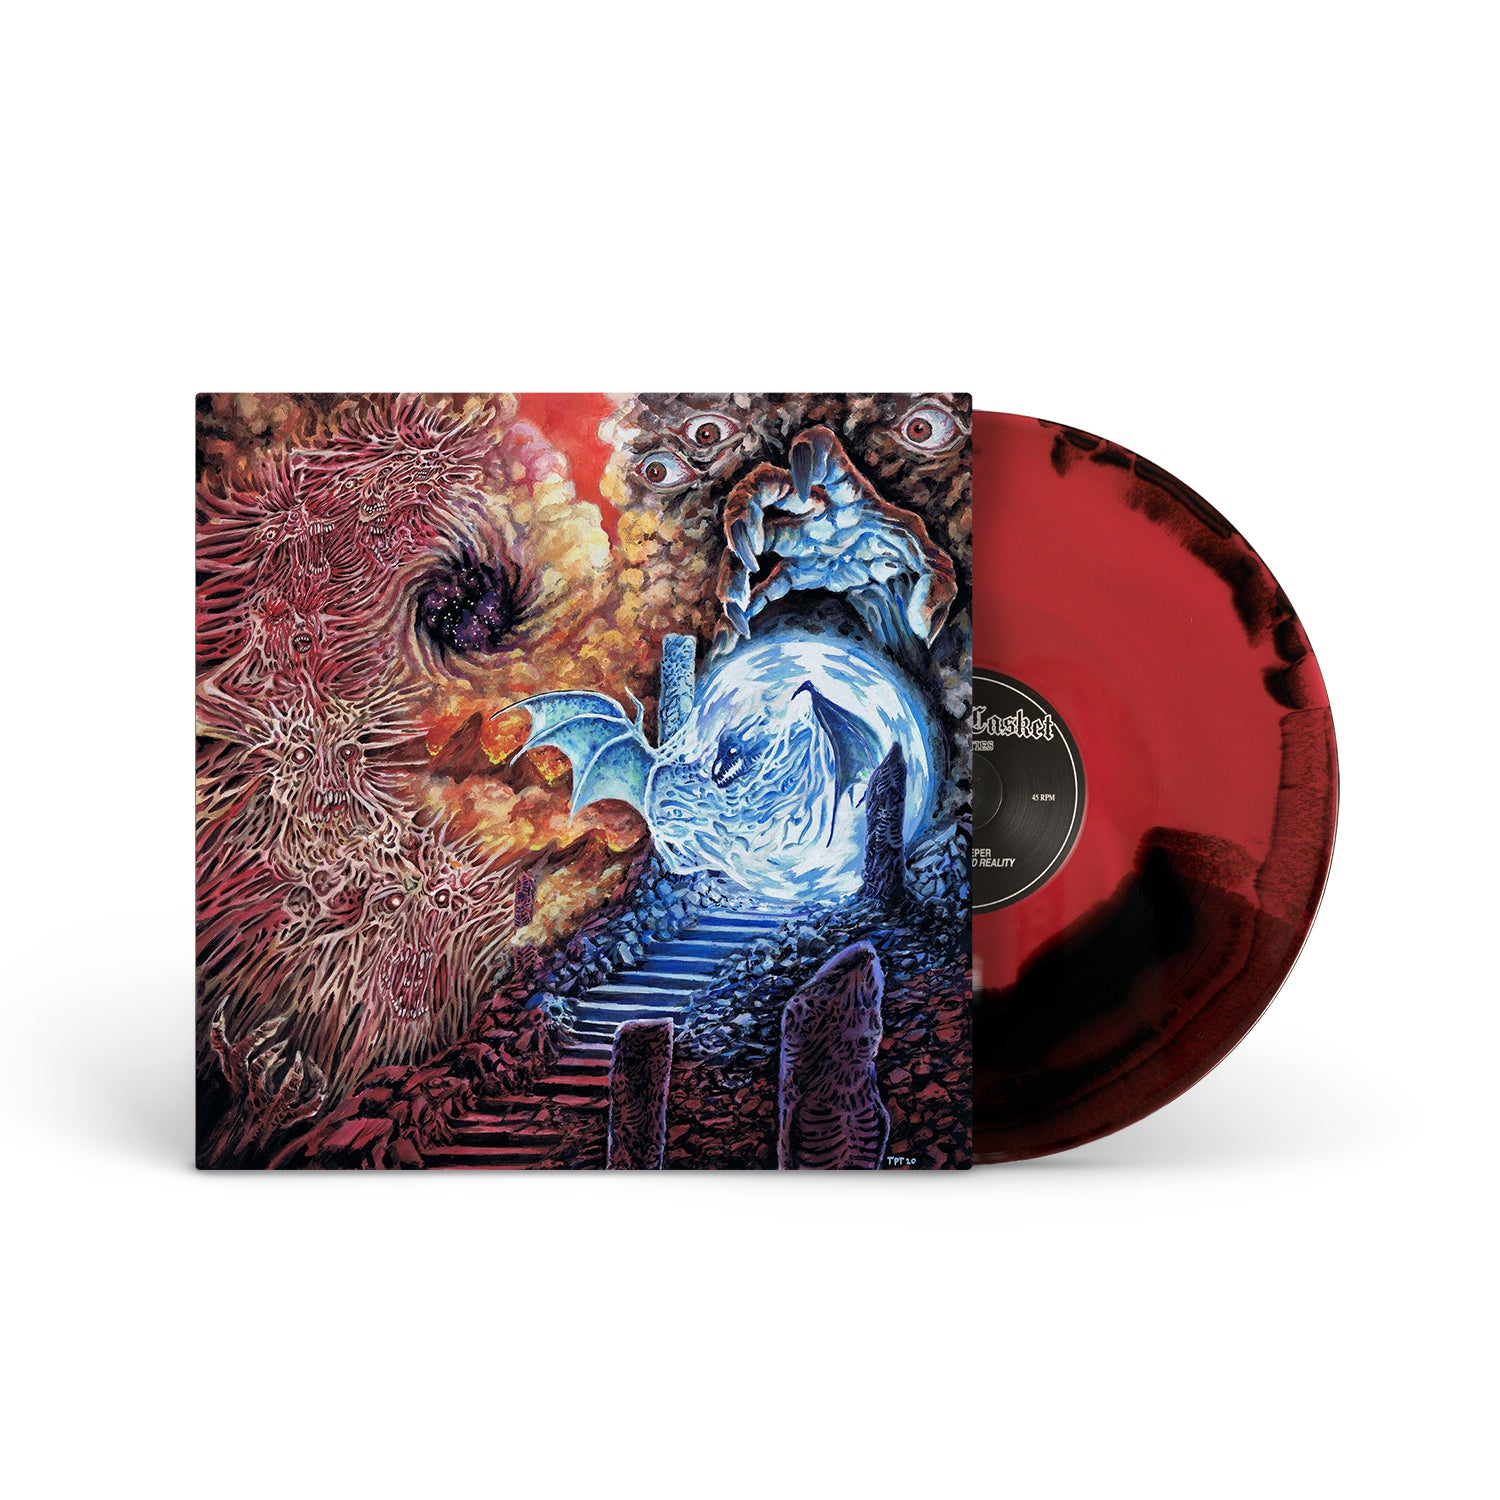 GATECREEPER "An Unexpected Reality" LP